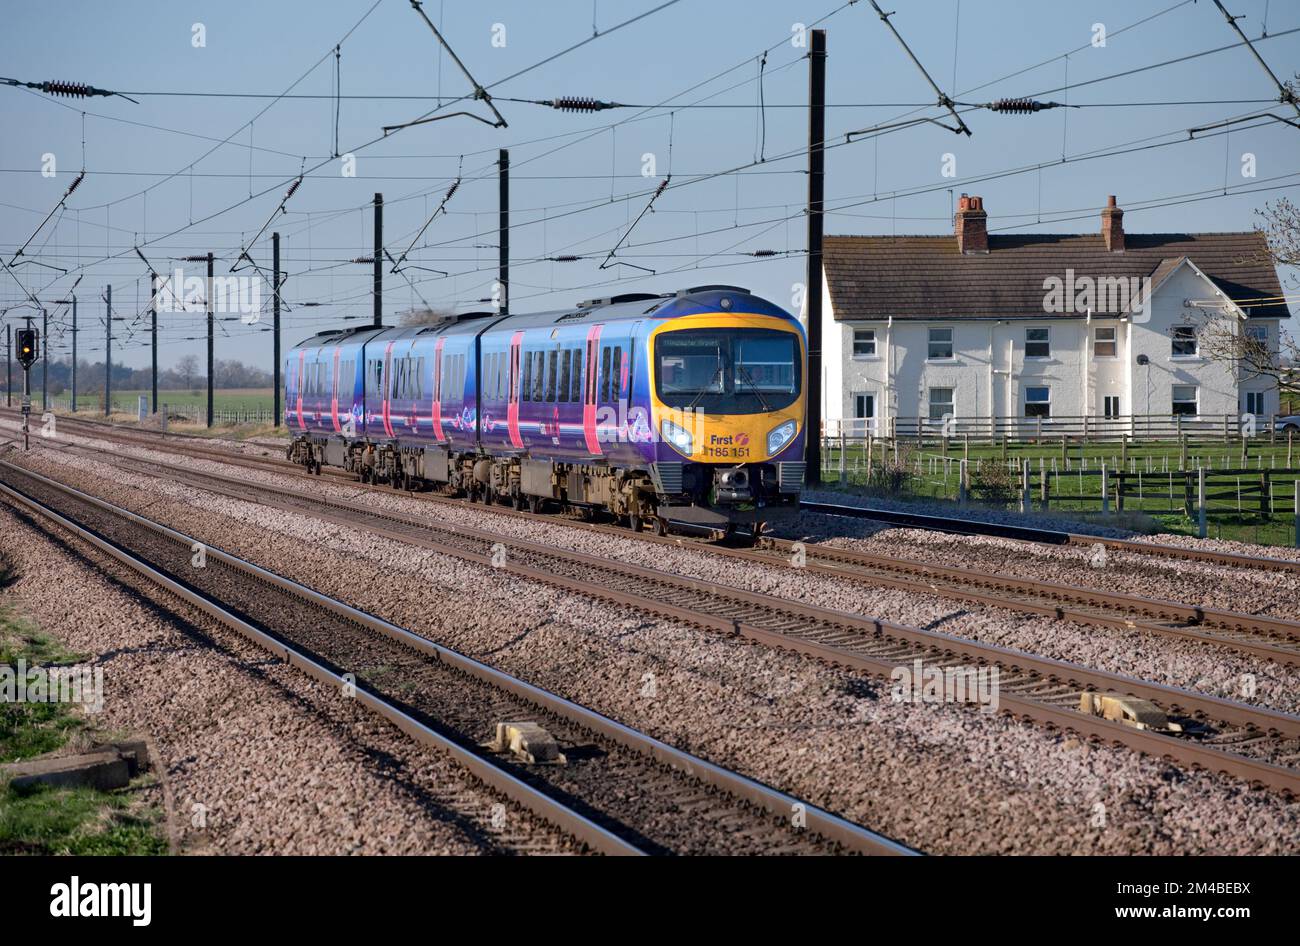 First Transpennine Express class 185 diesel train 185151 on the 4 track electrified east coast mainline at Newsham Stock Photo